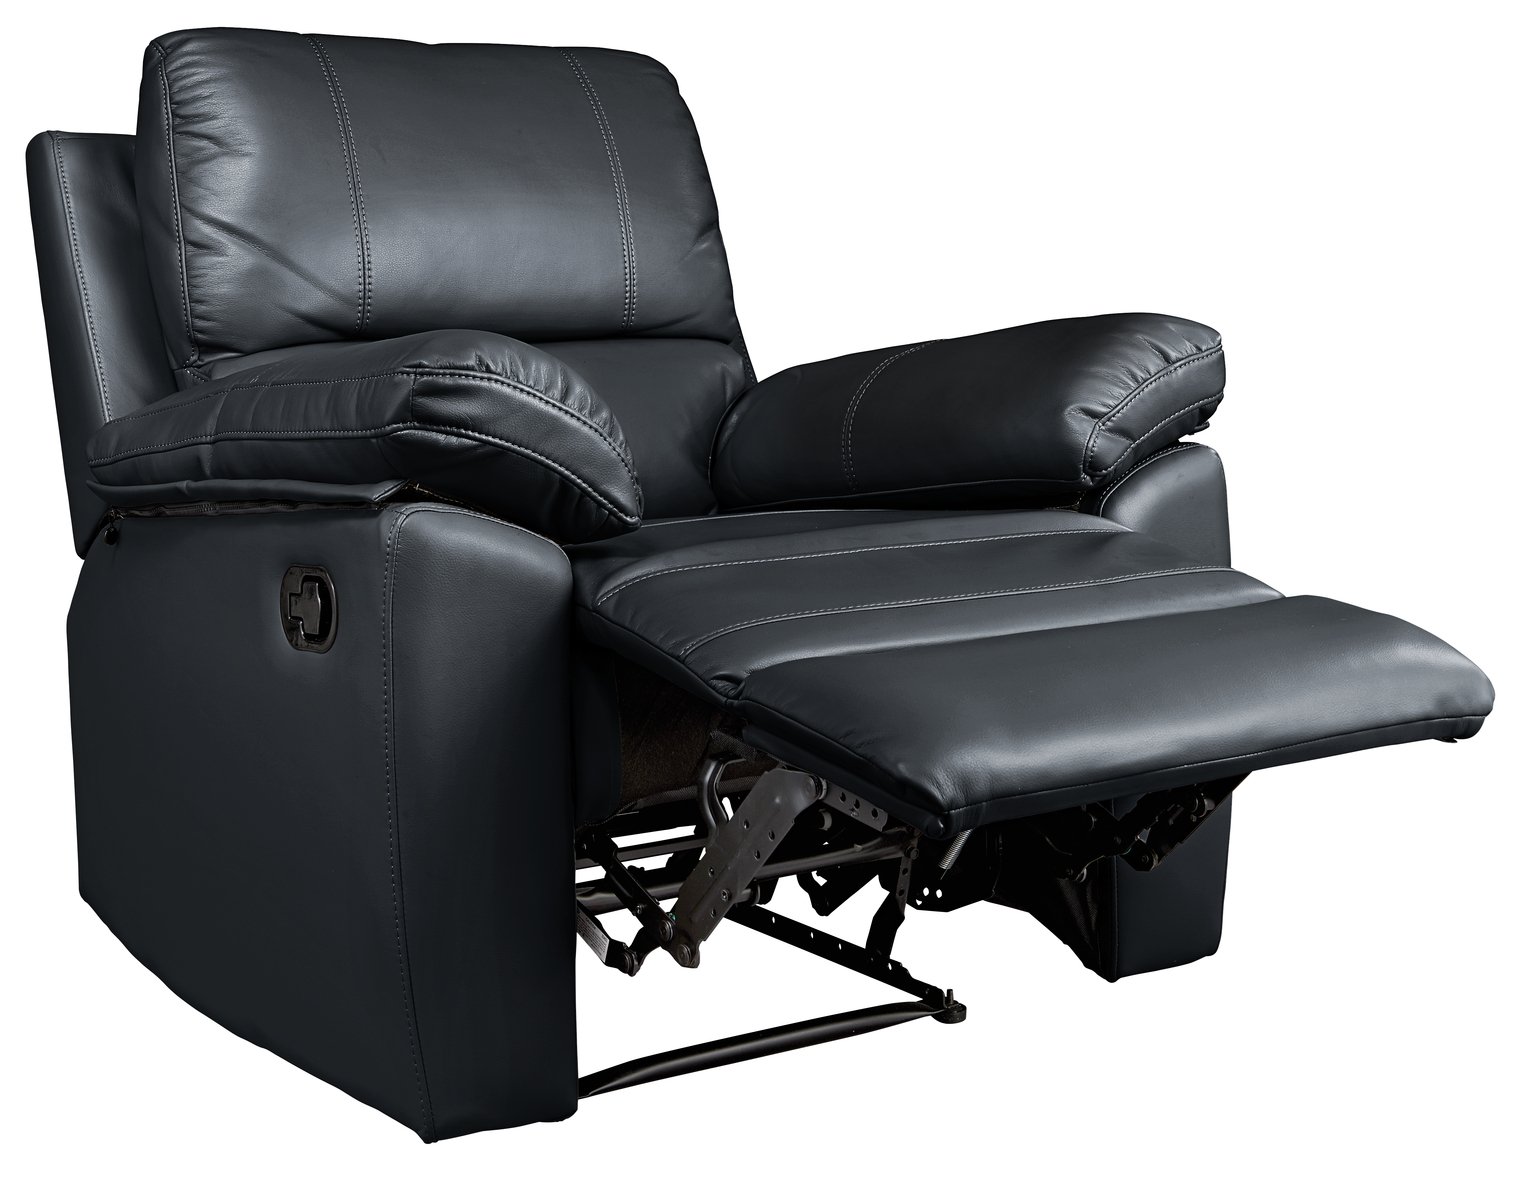 Argos Home Toby Faux Leather Manual Recliner Chair - Black